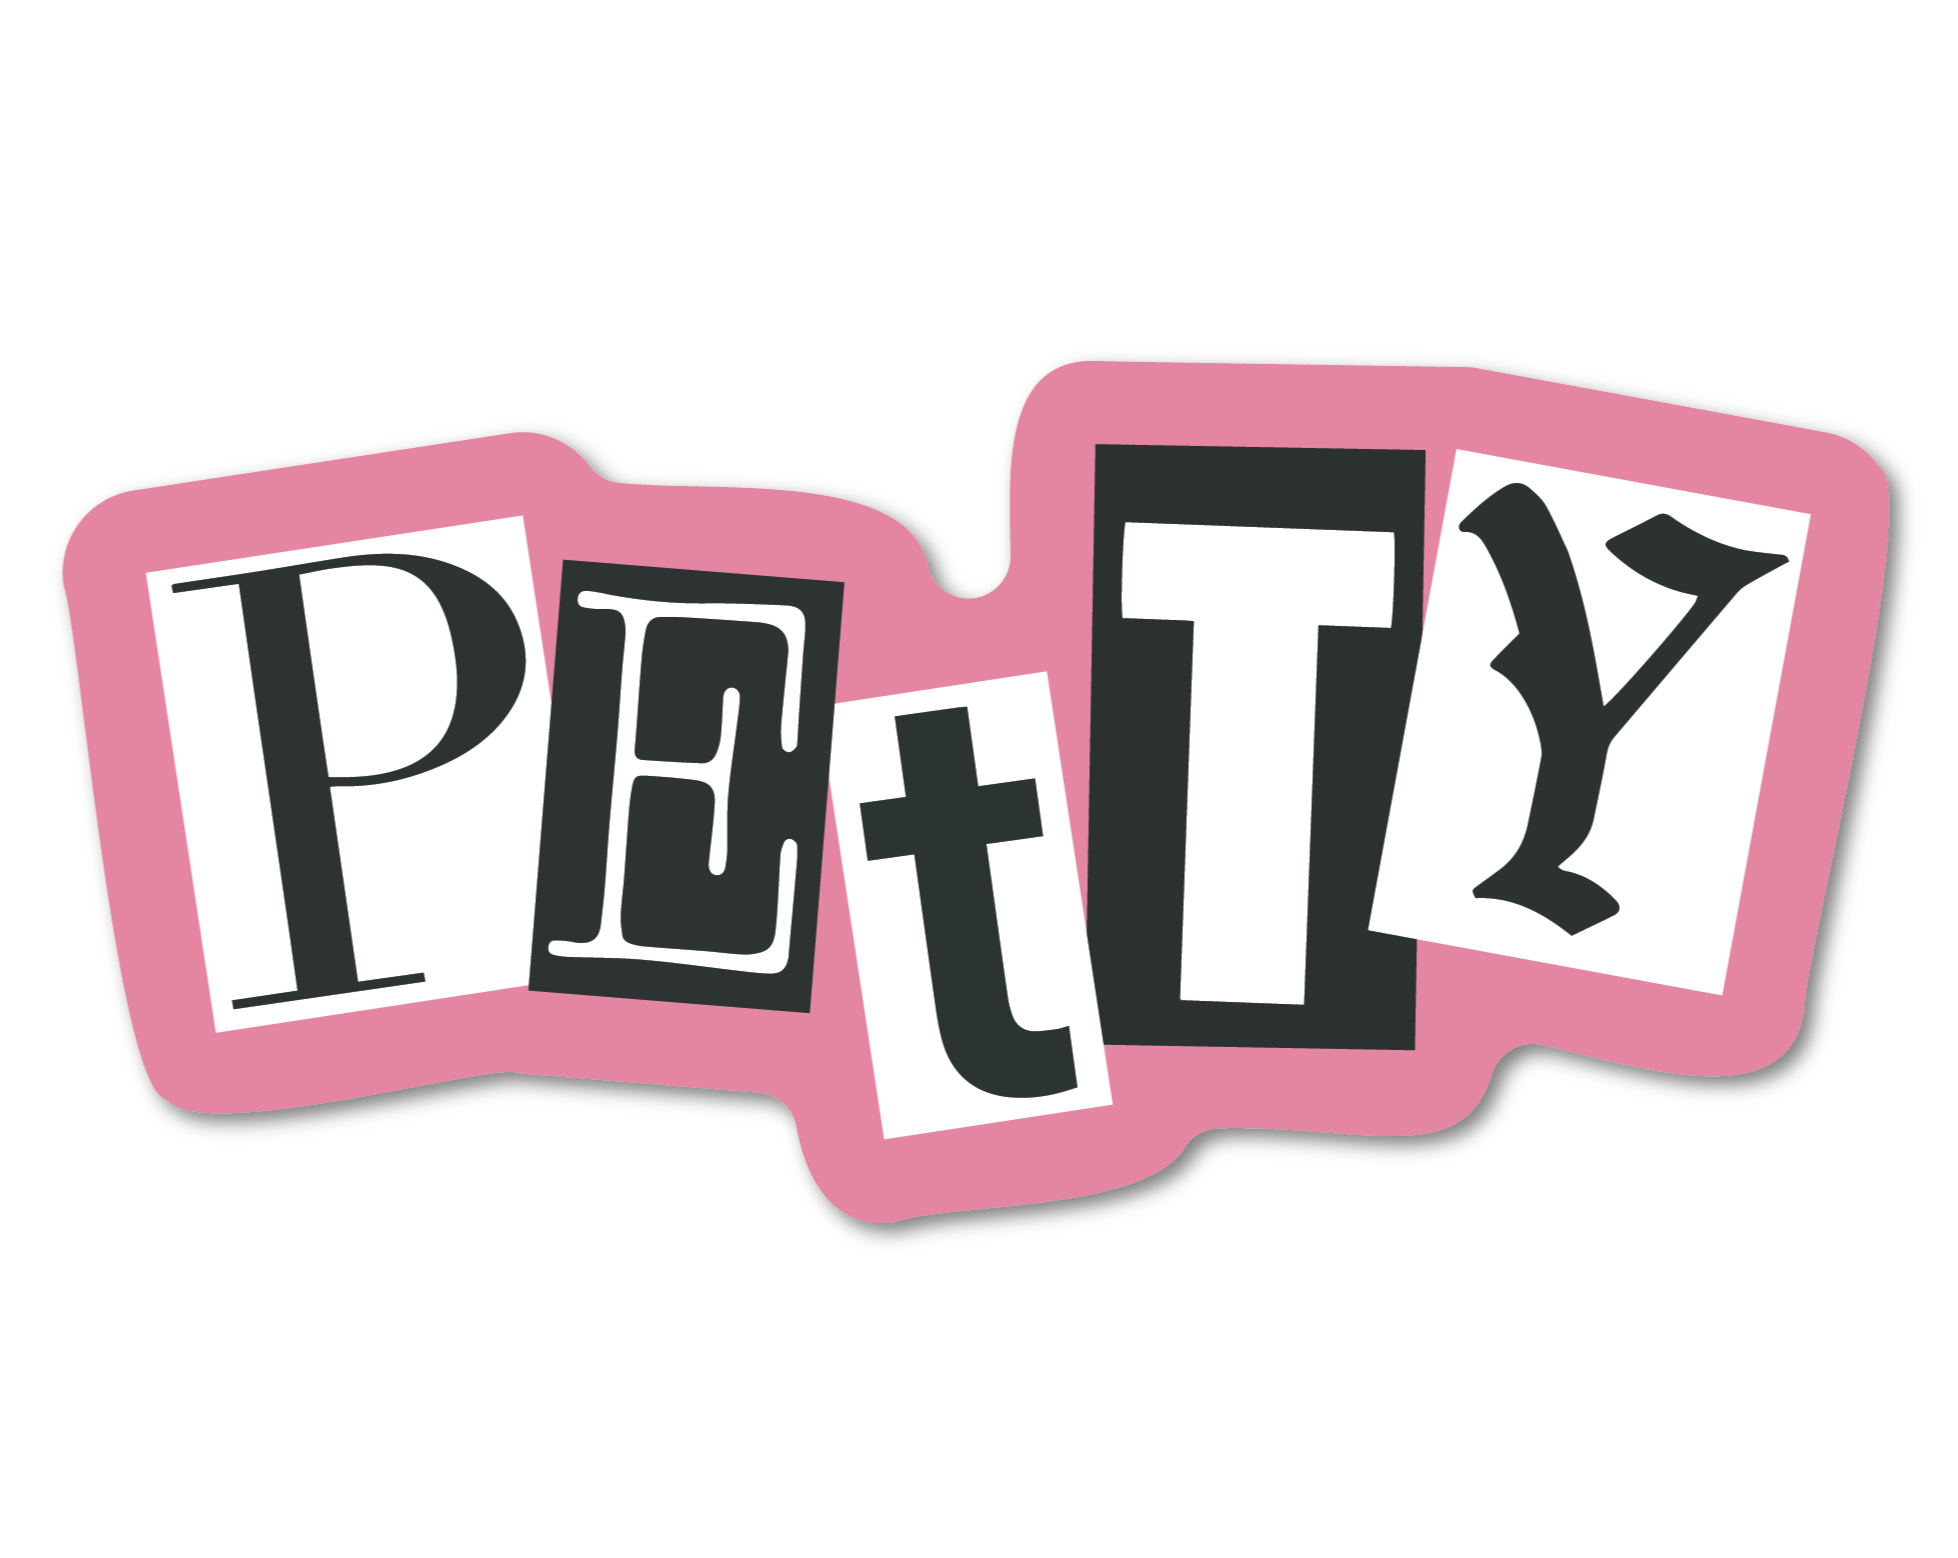 Small Pink Sticker That Says Petty in a Mean Girls Aesthetic